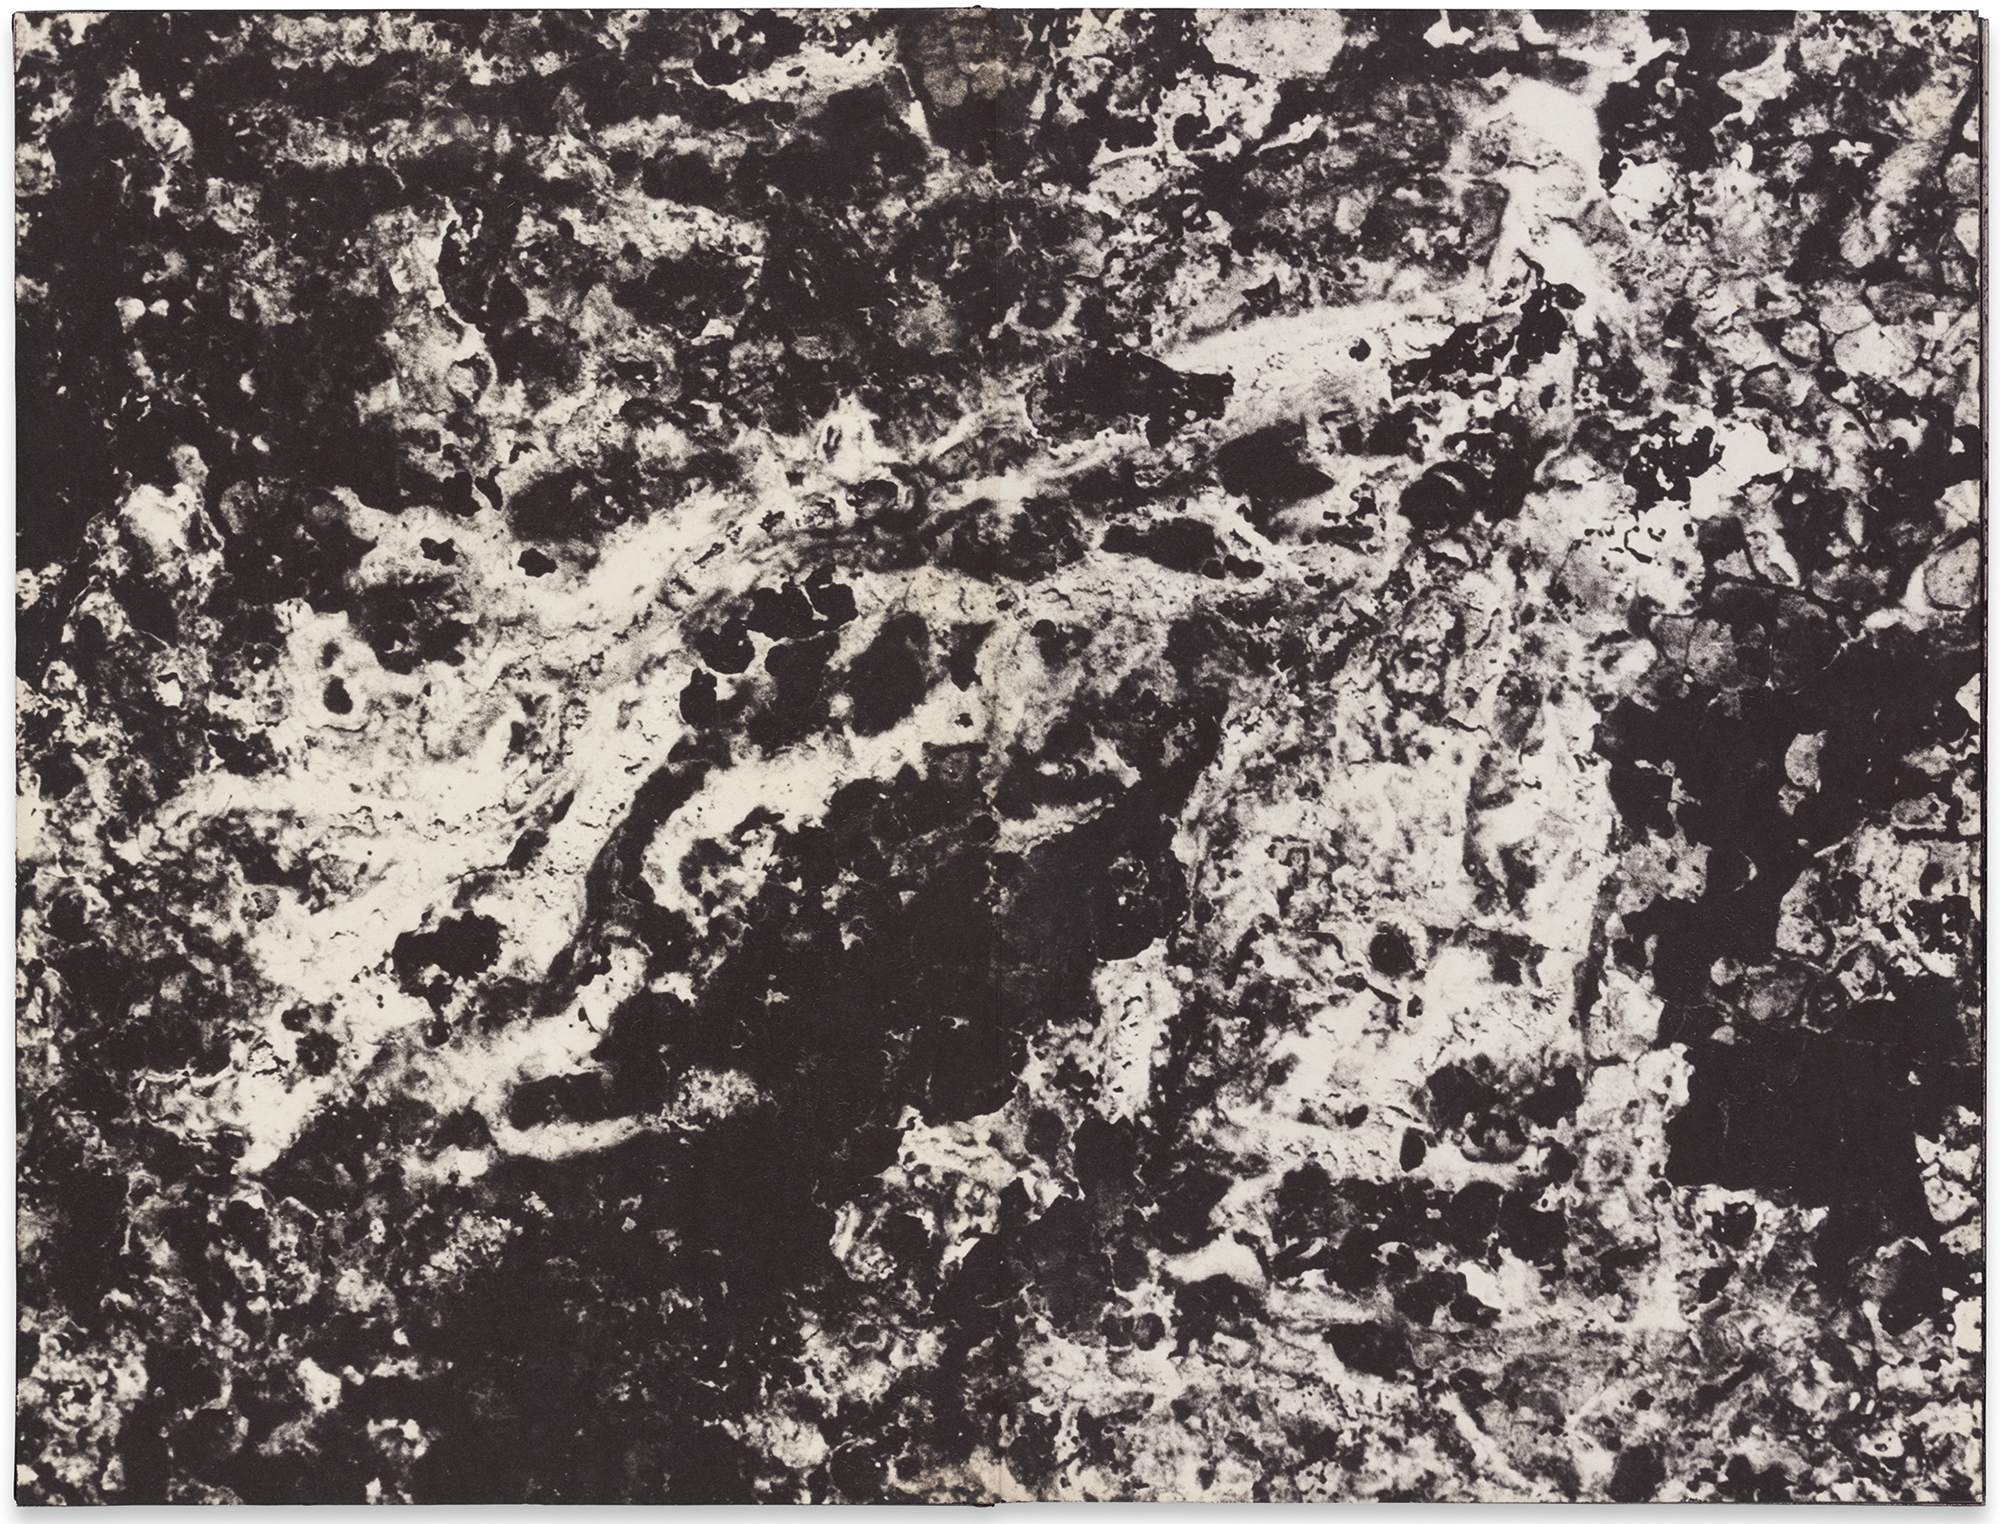 Pages from the original maquette <em>Chizu (The Map)</em>, 1965<br />
Courtesy the Spencer Collection, The New York Public Library, Astor, Lenox, and Tilden Foundations”>
		</div>
<div class=